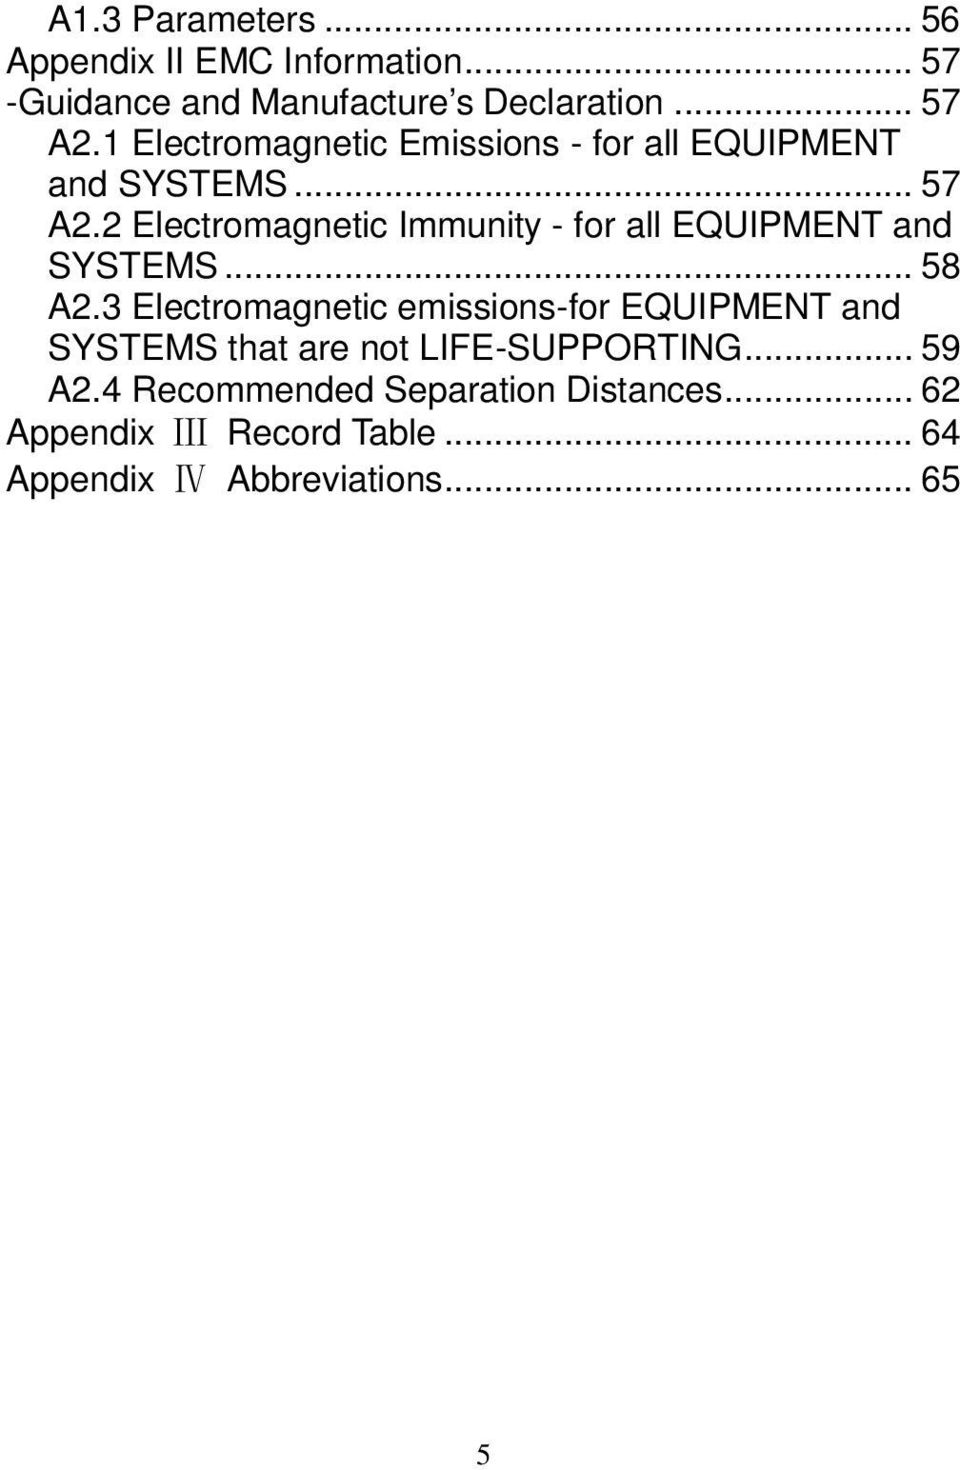 2 Electromagnetic Immunity - for all EQUIPMENT and SYSTEMS... 58 A2.